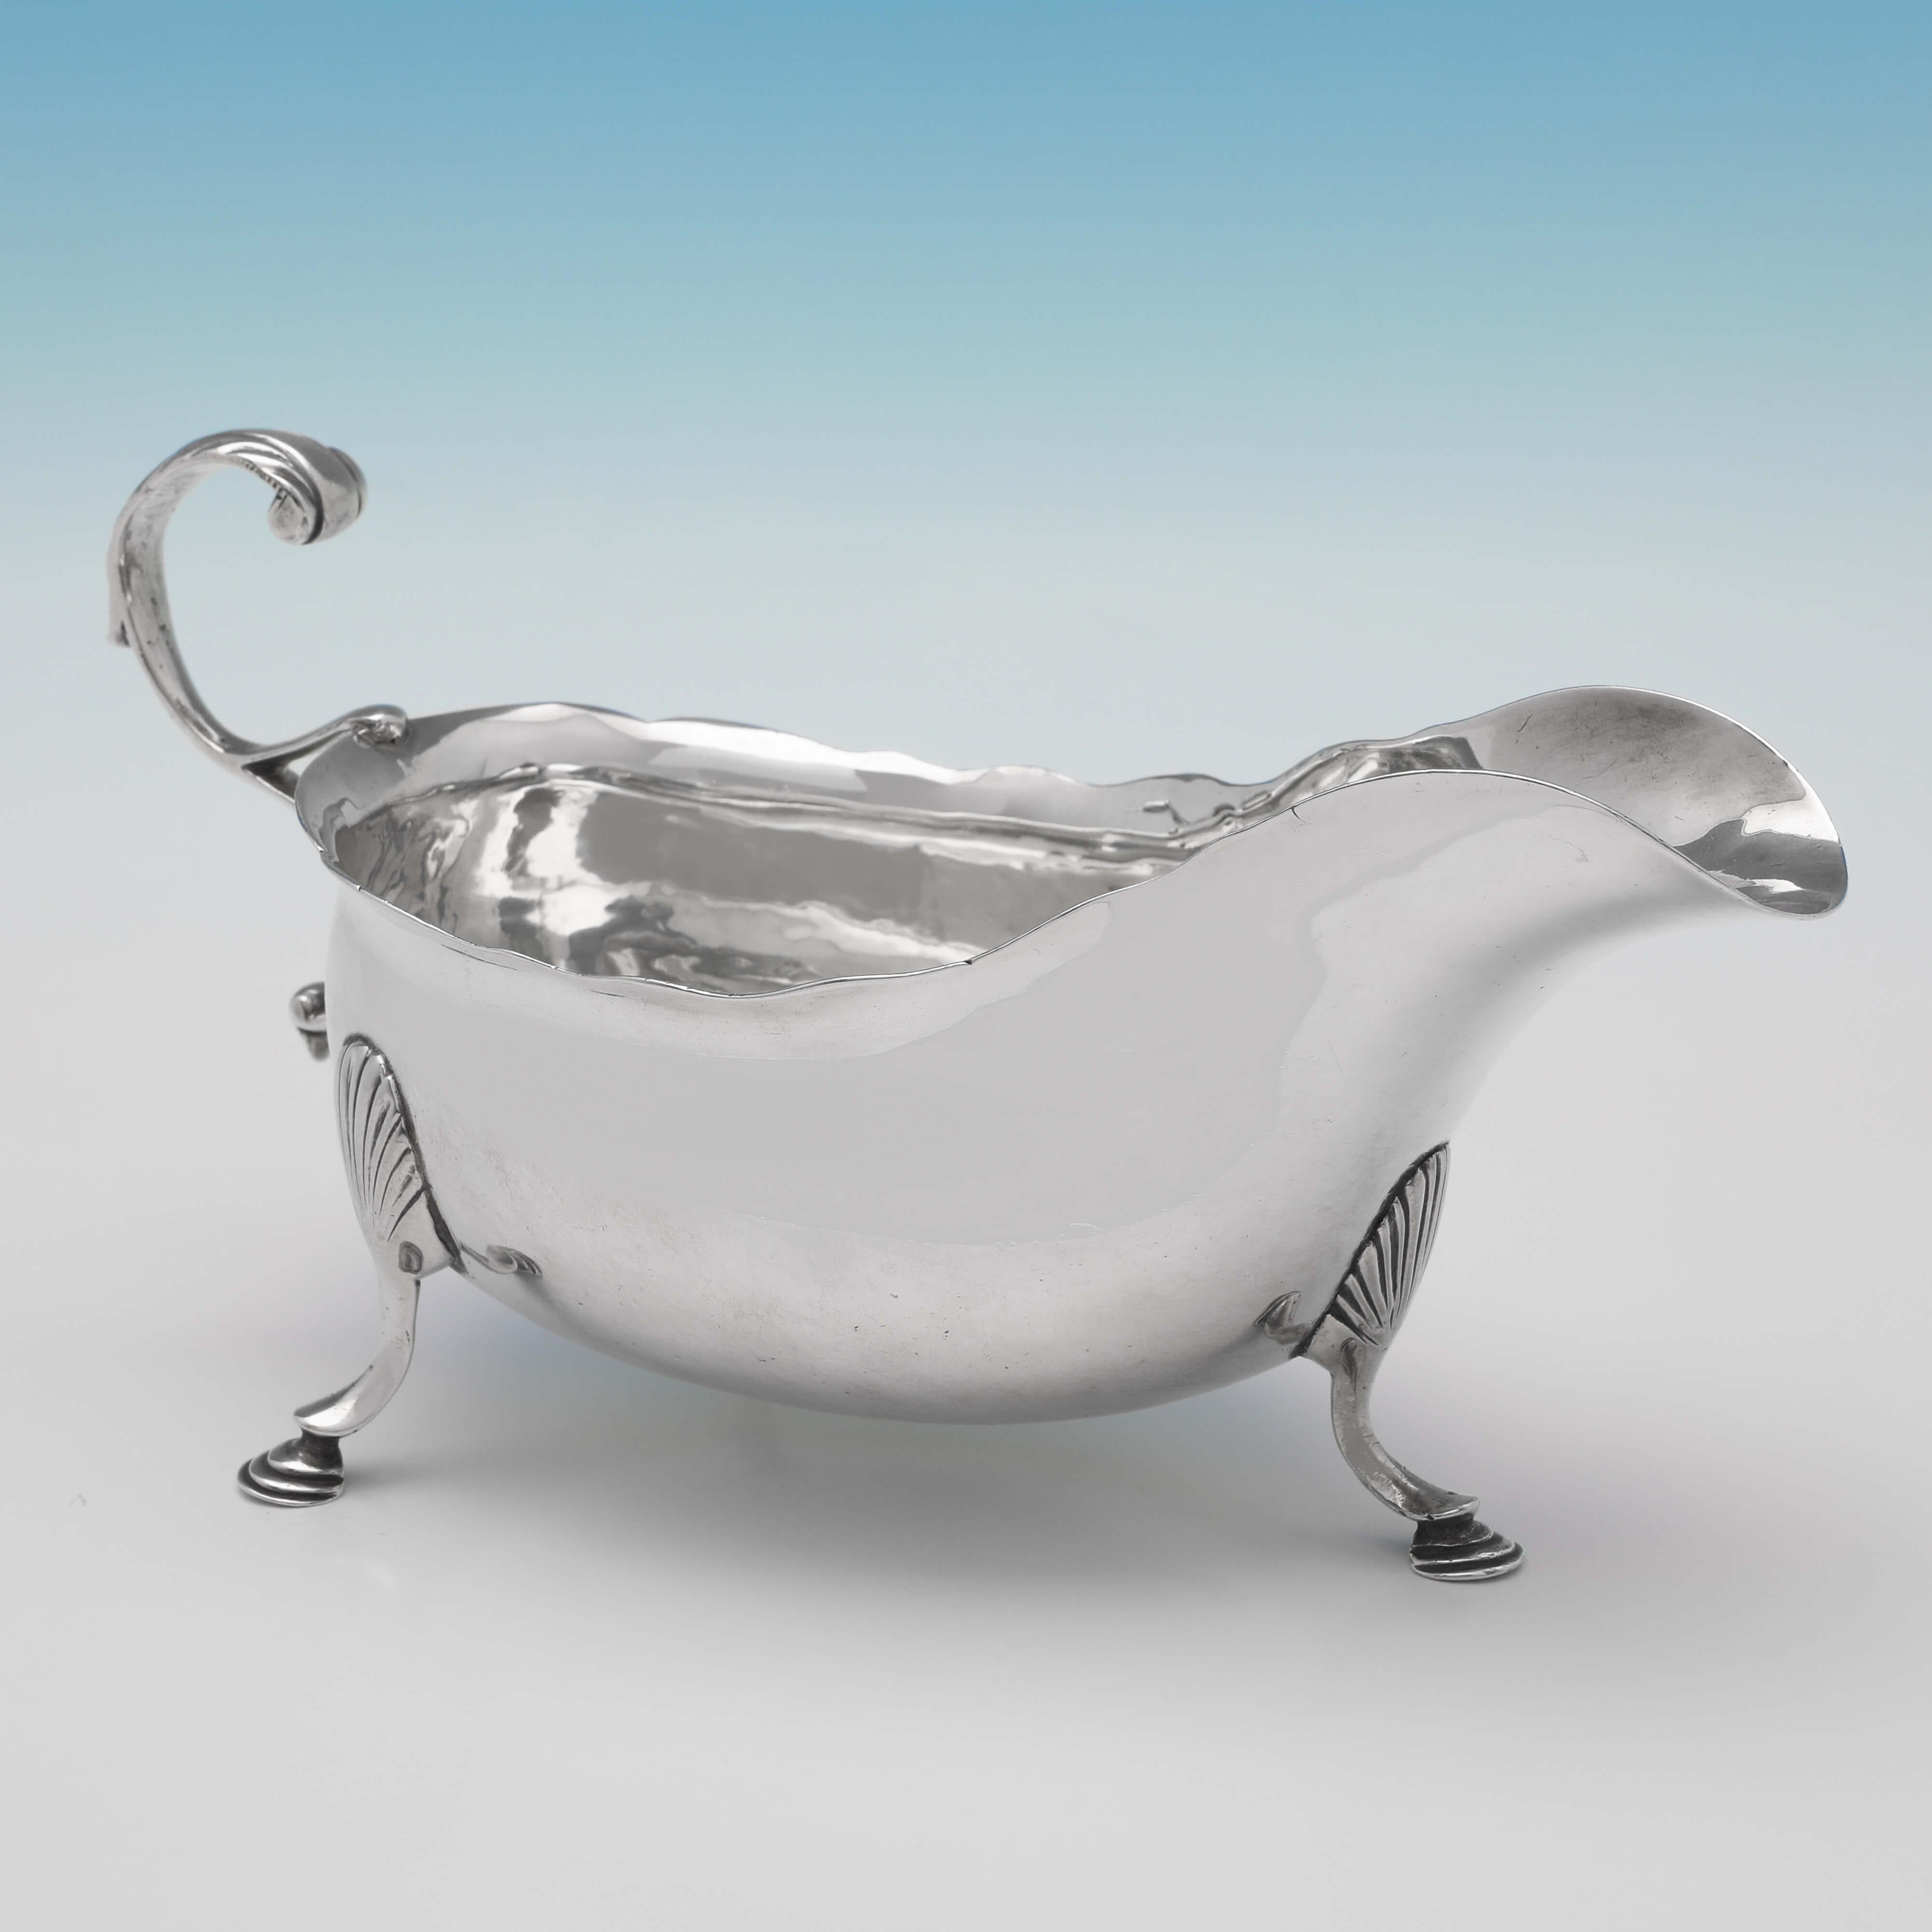 Made in Dublin circa 1780, this handsome, antique sterling silver sauce boat, is plain in style, featuring a scalloped border, an acanthus detailed flying C-scroll handle, and standing on three feet. The sauce boat measures 4